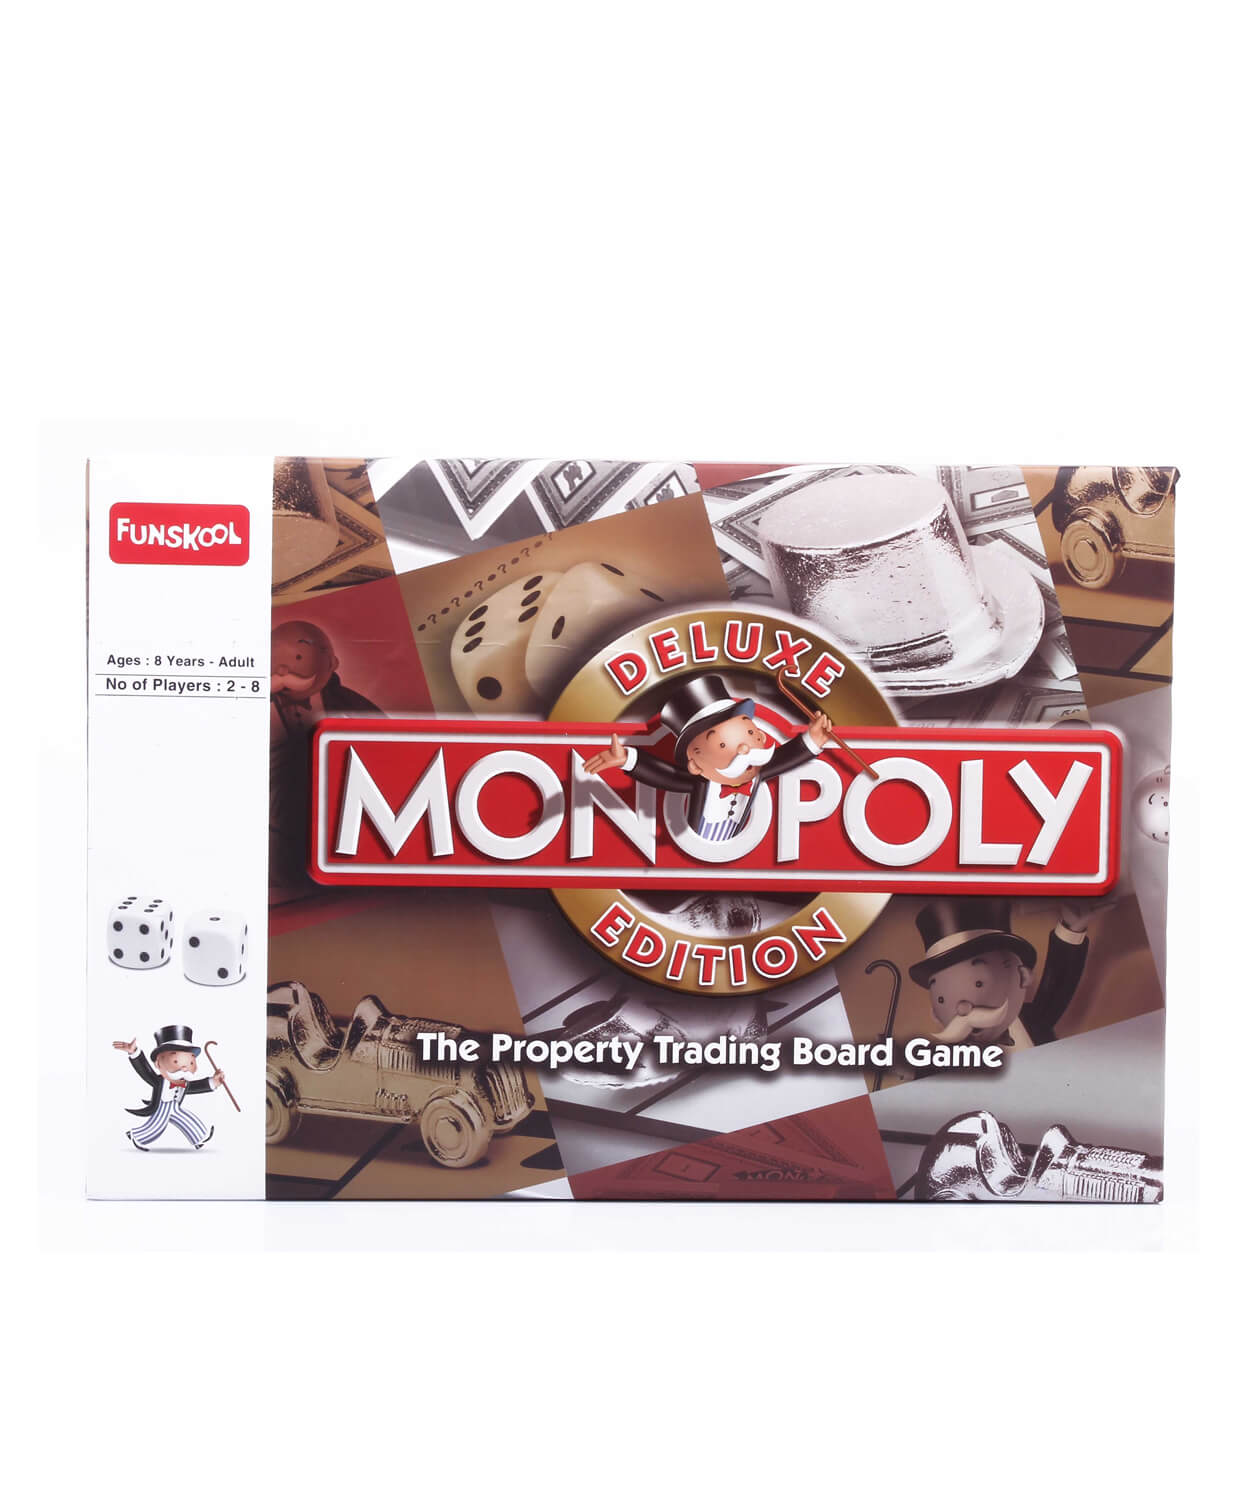 Monopoly deluxe edition 1998